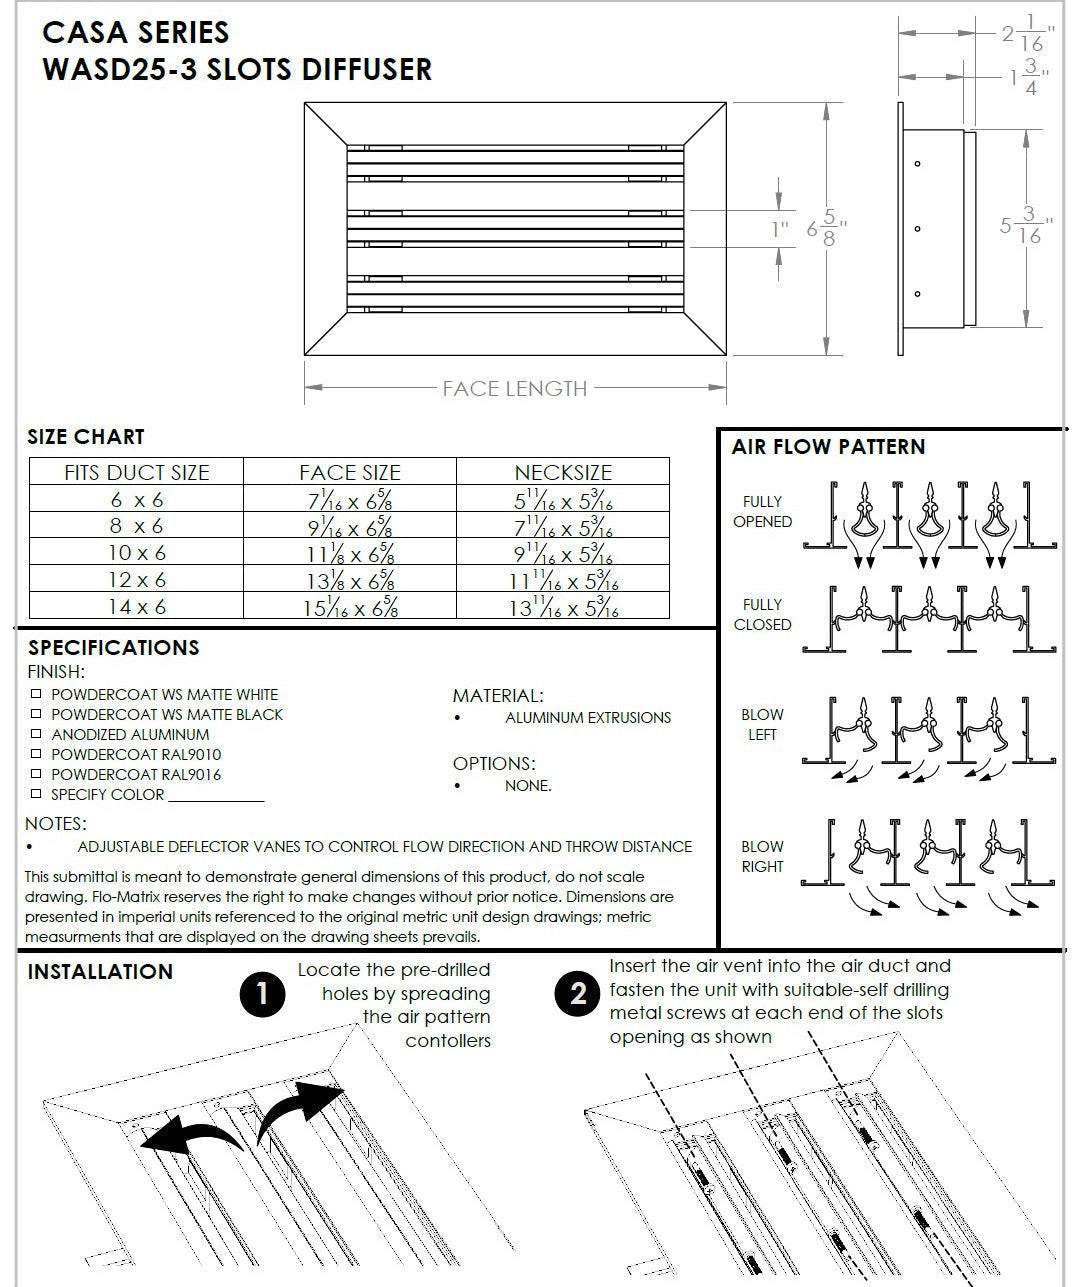 Supply Air Grille with Two Rows Adjustable Blades - Sivent Official Website